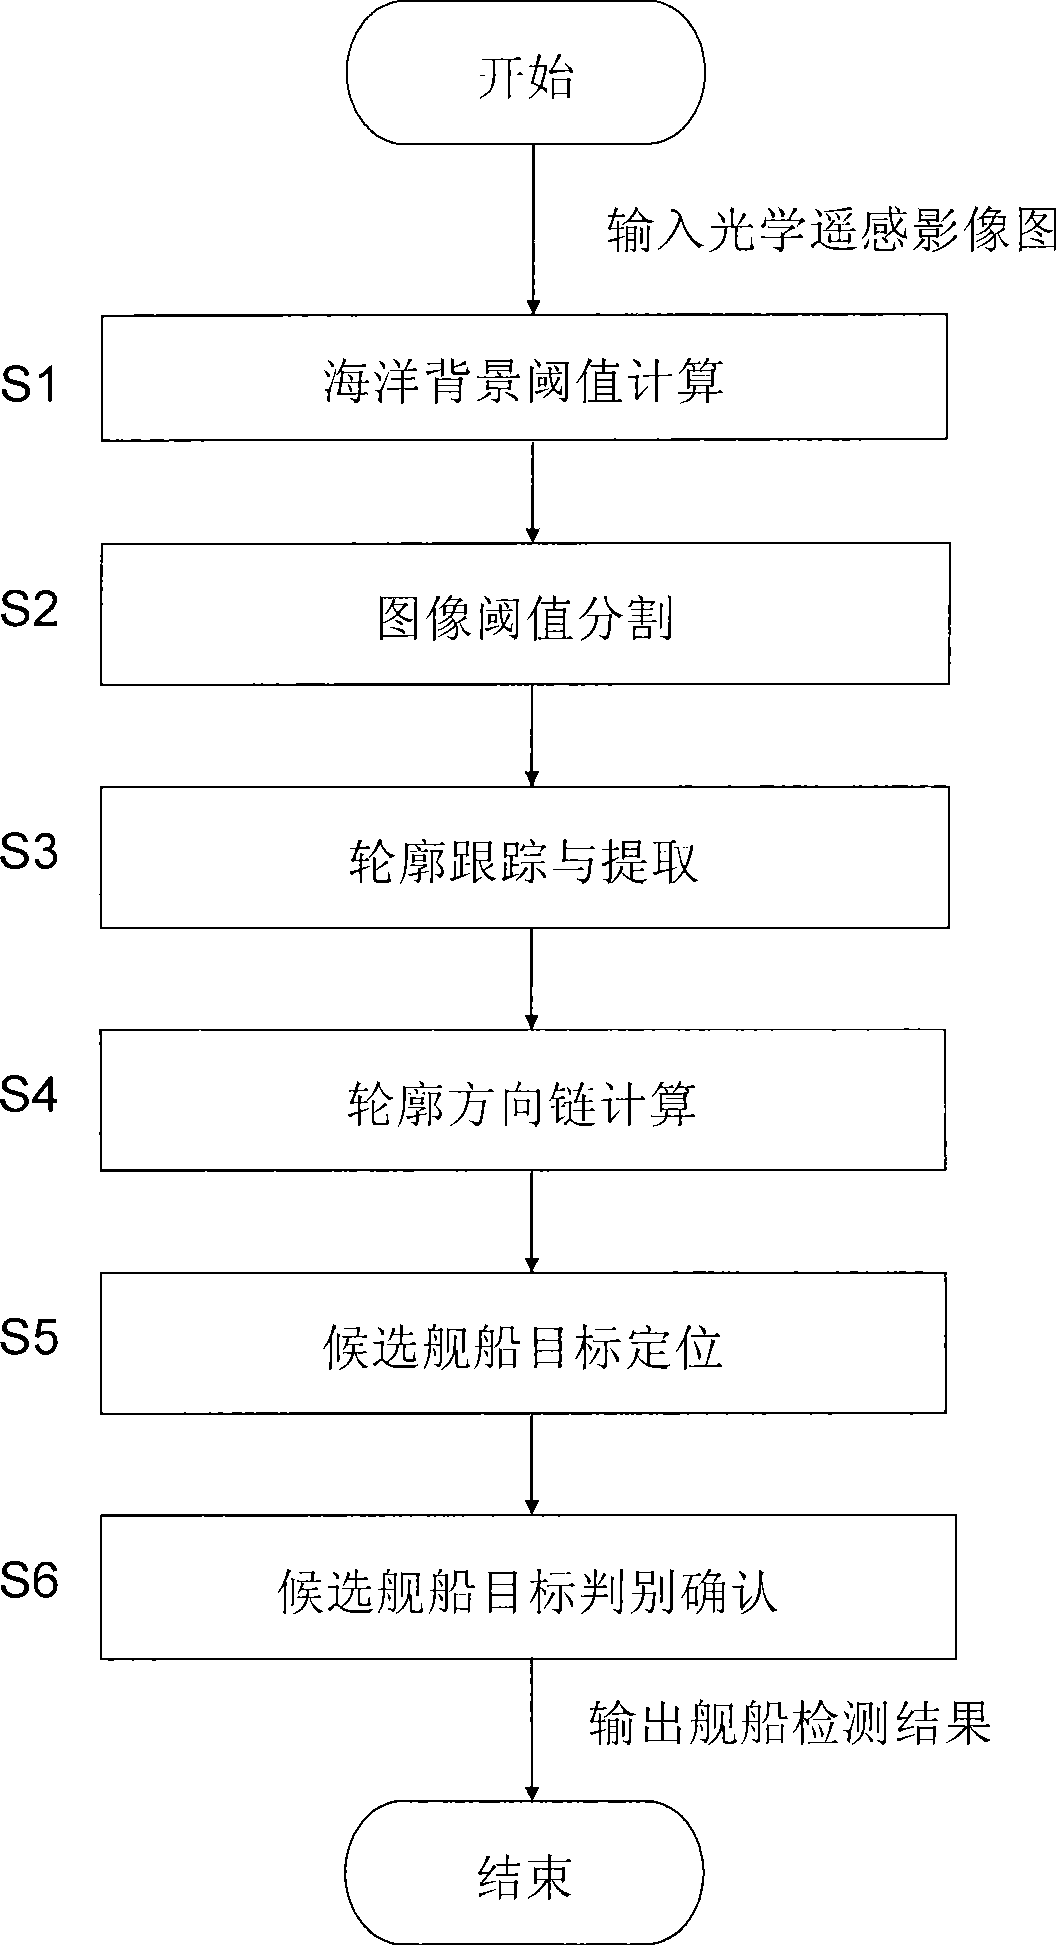 Method for automatically detecting cloud interfering naval vessel target by optical remote sensing image